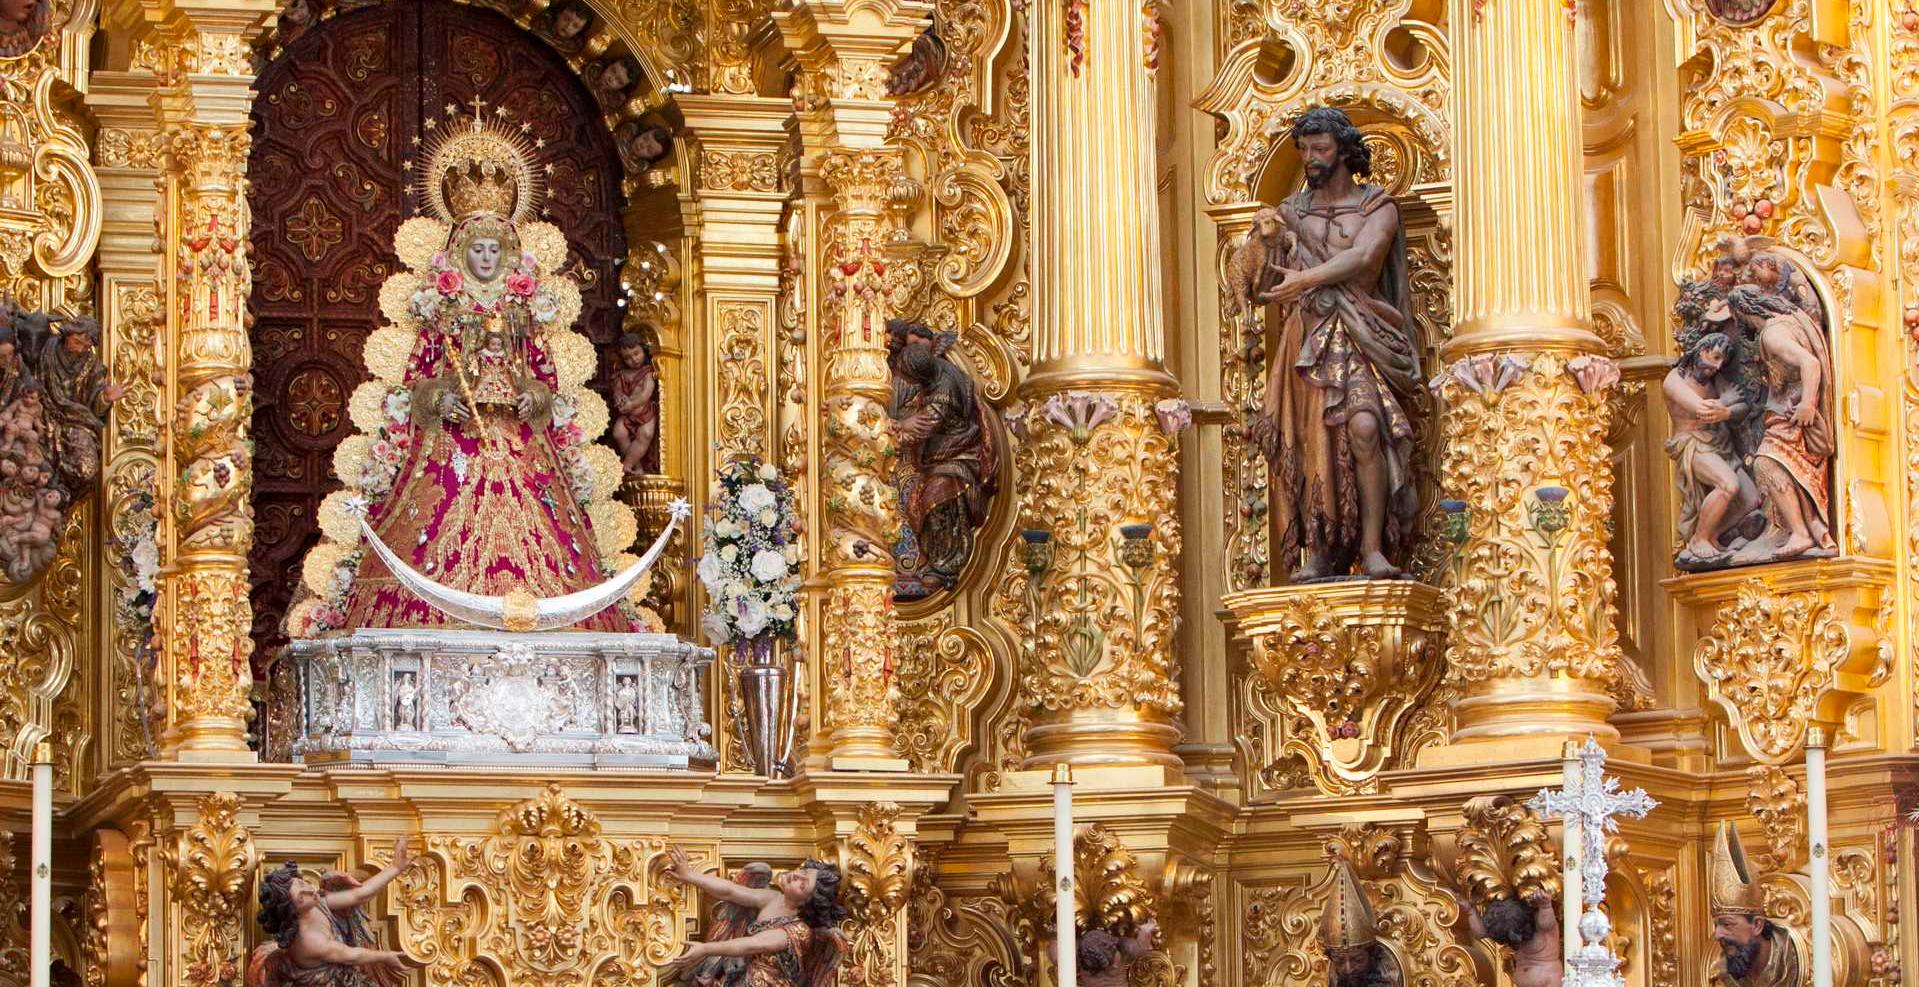 Andalusia protects the Pilgrimage of El Rocío y la Virgen as an Asset of Cultural Interest